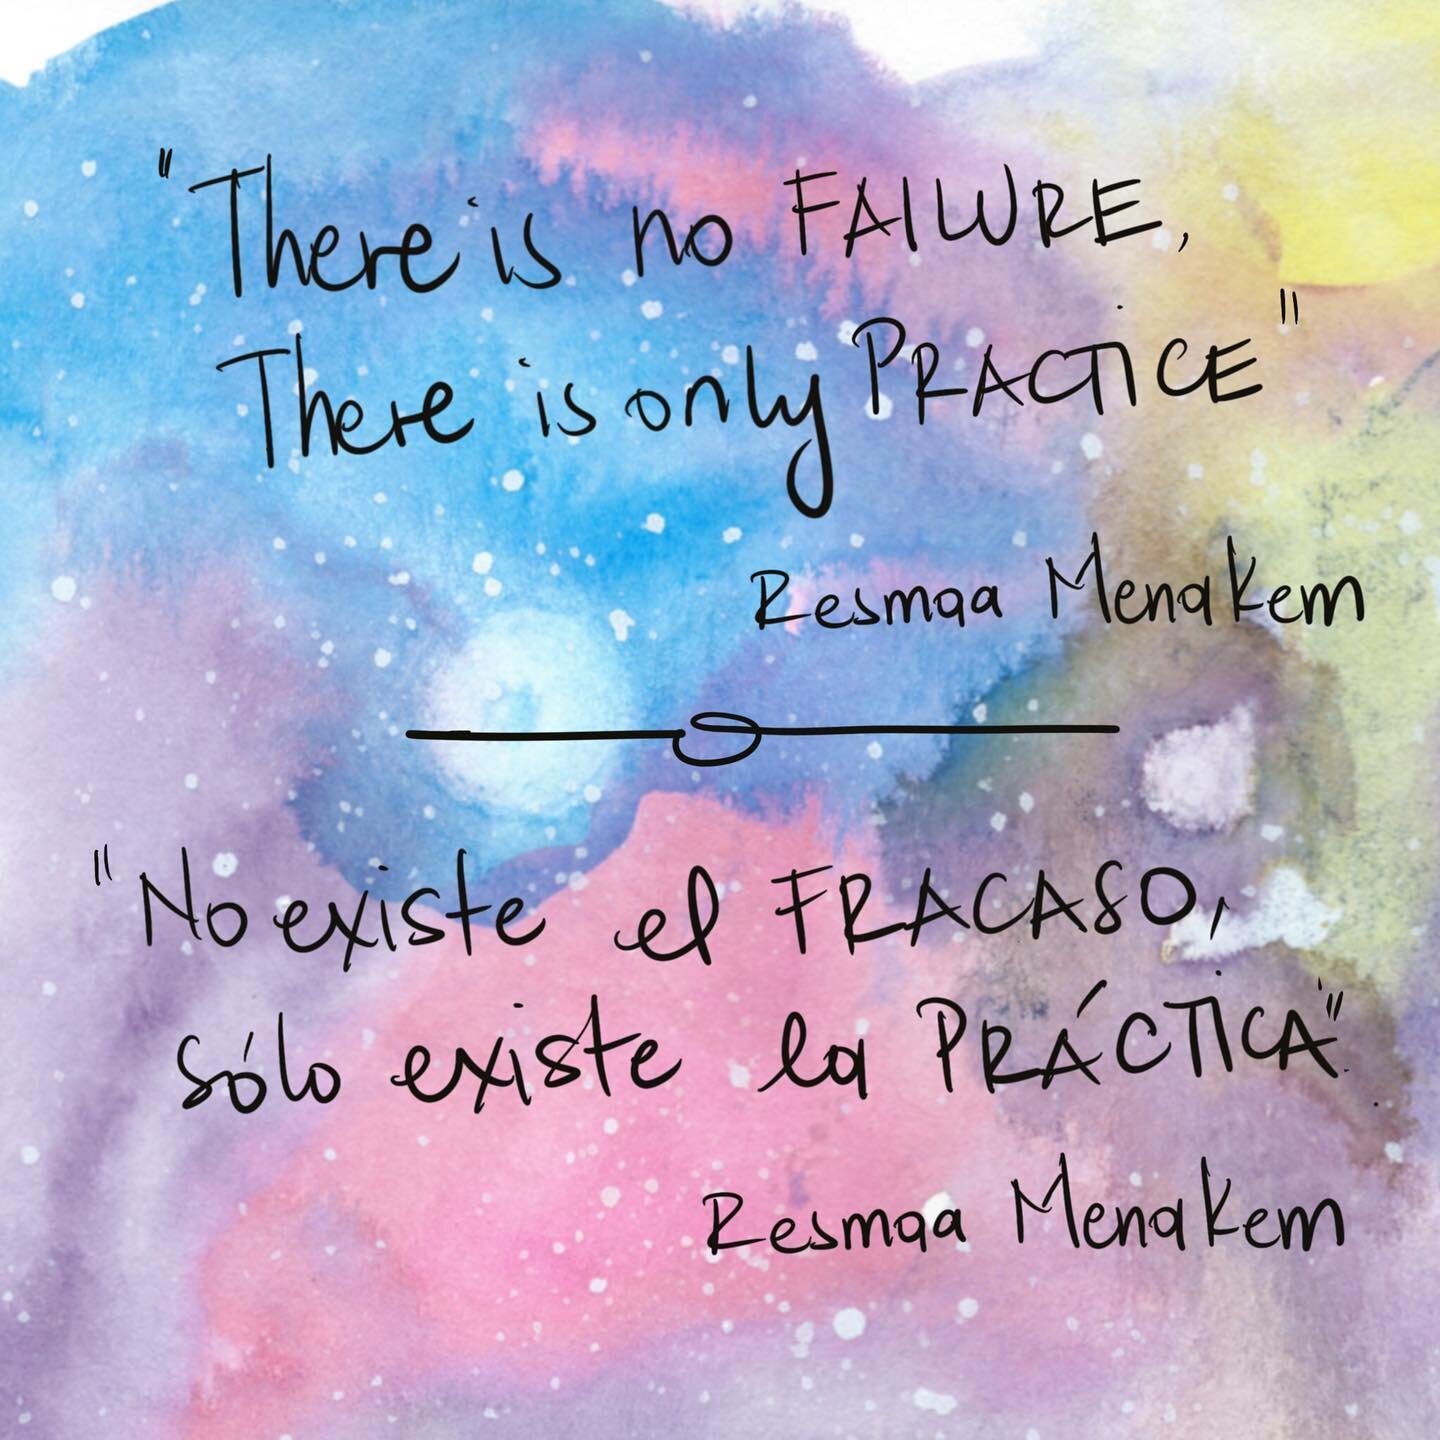 &bull;THERE IS NO FAILURE, THERE IS ONLY PRACTICE &bull;
Resmaa Menakem (Espa&ntilde;ol abajo).
.
This is one of the many insights by trauma specialist and author @resmaamenakem , shared in the podcast @onbeing . An interview that I highly recommend,